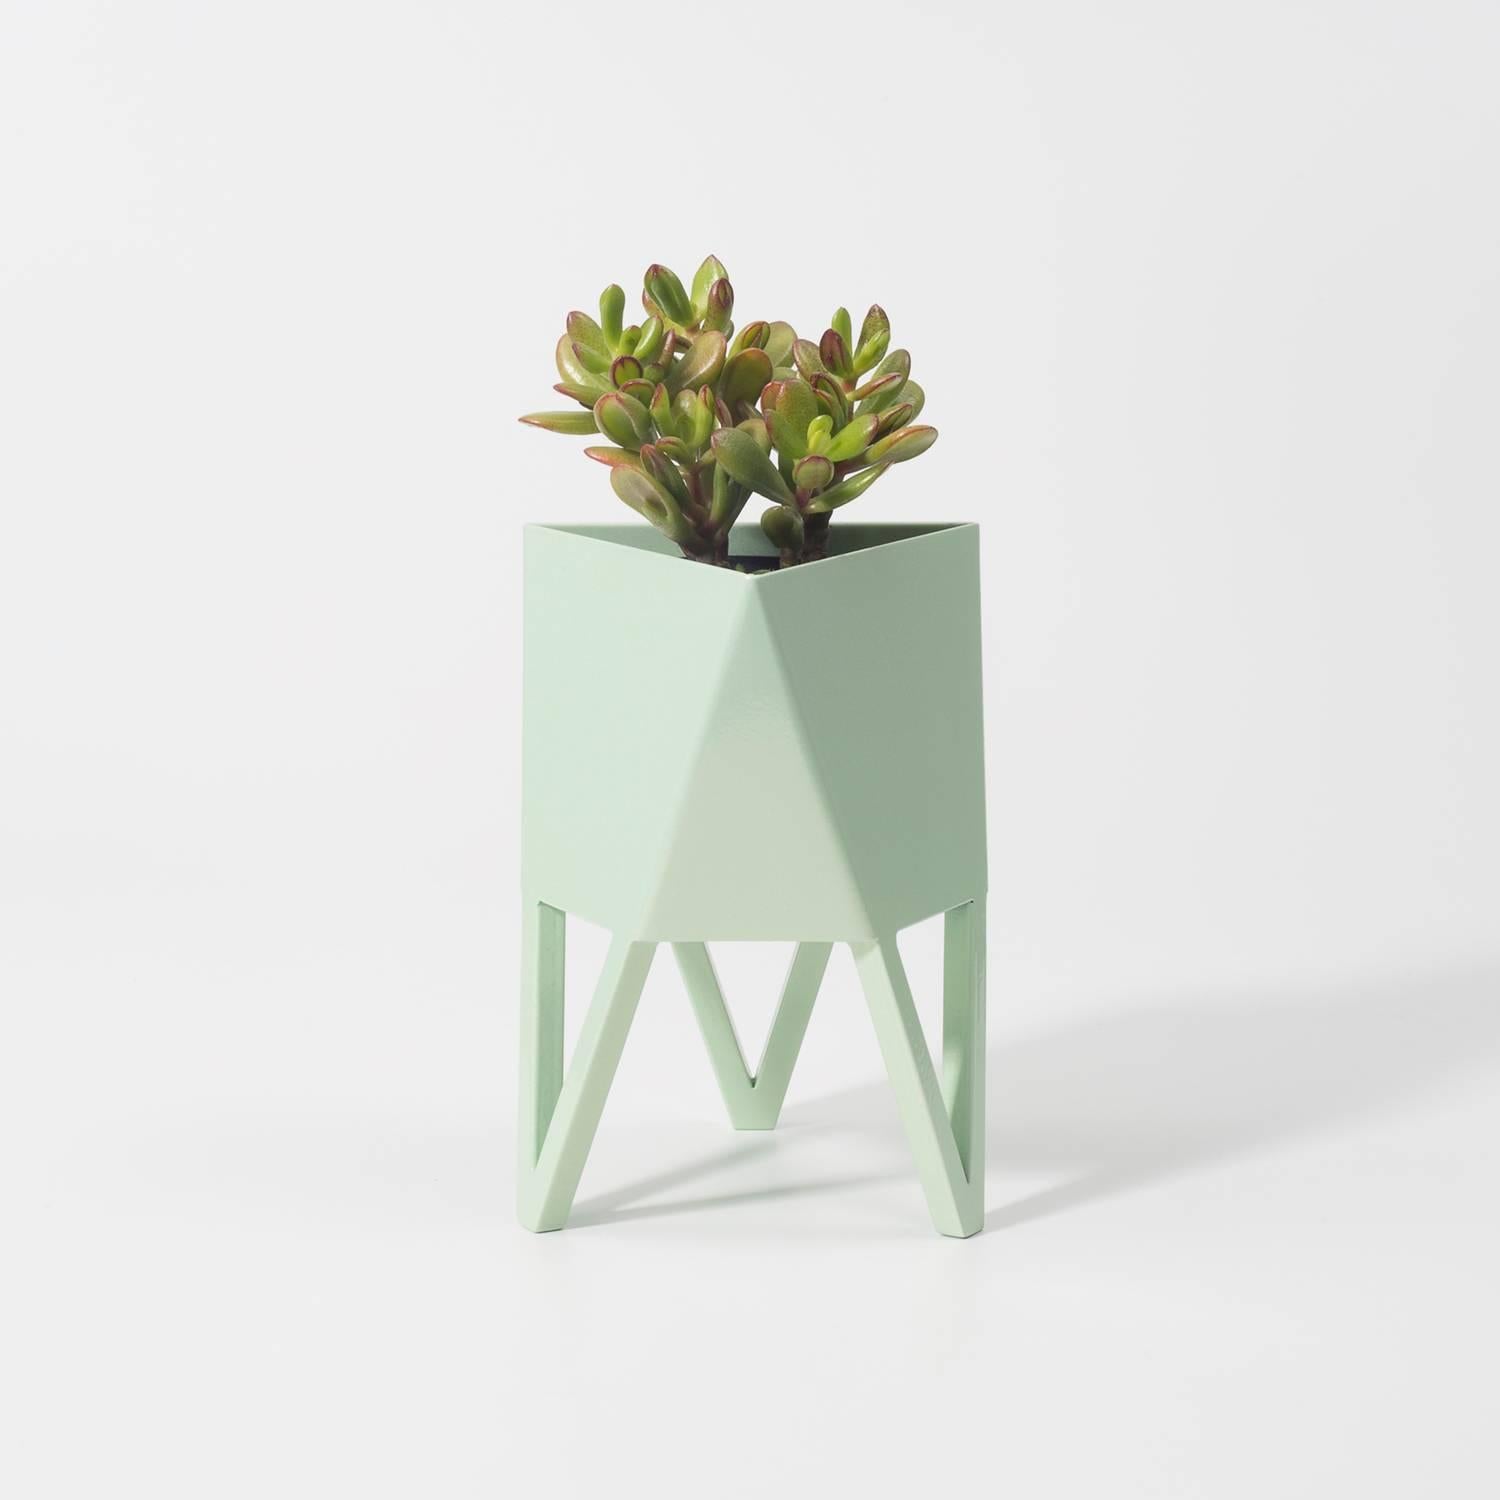 Introducing Force/Collide's award-winning signature planter, an ongoing production with multiple colors and sizes. A unique geometric pattern that's triangular at the top and hexagonal at the base is central to the design, both aesthetically and